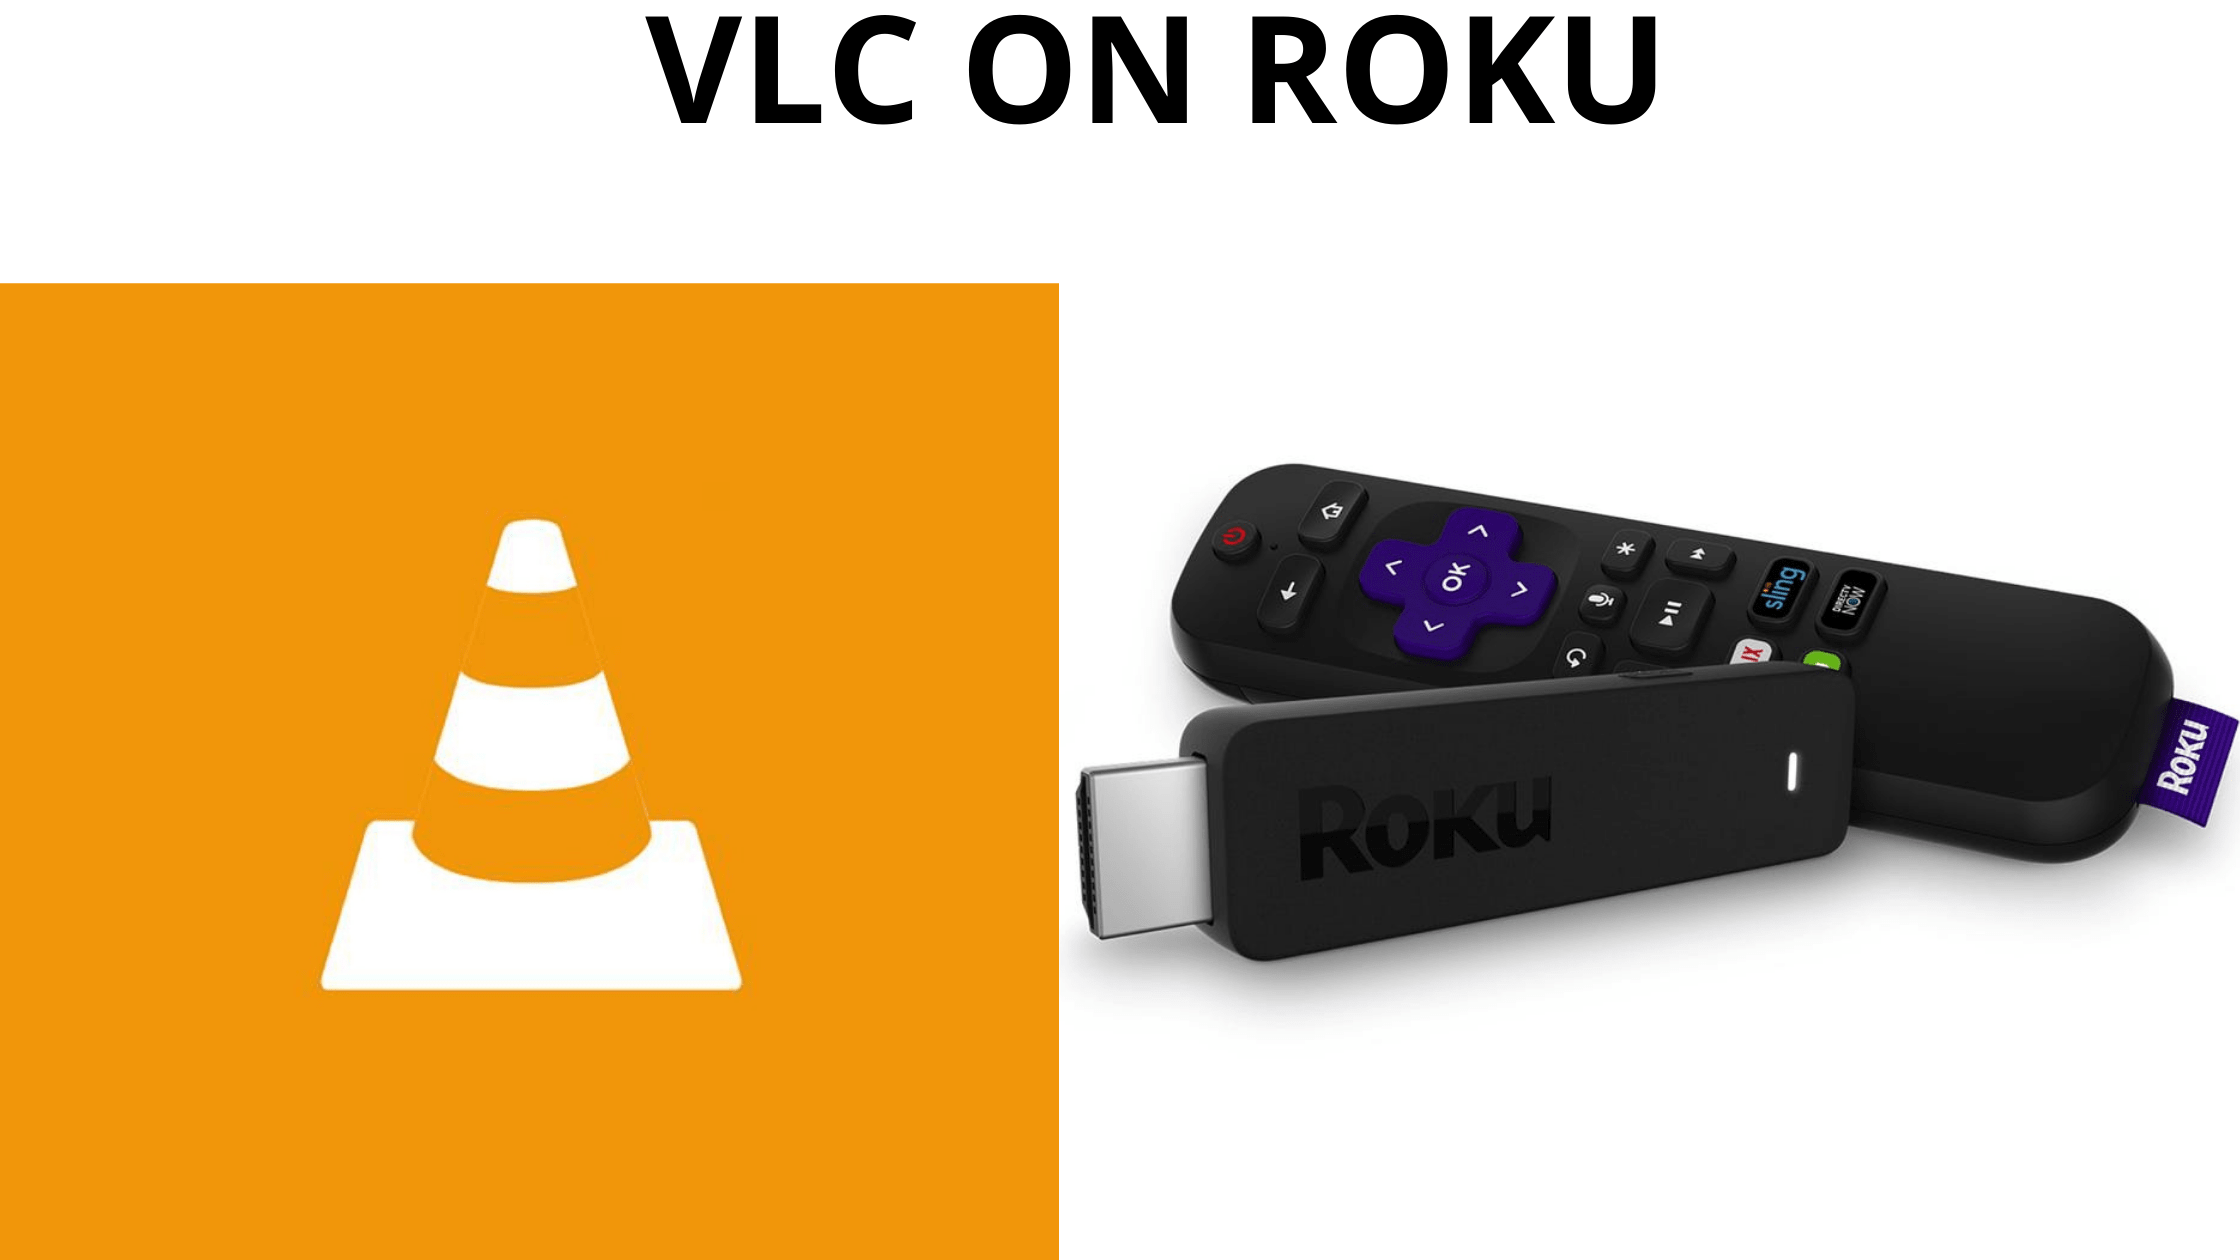 How to Screen Mirror or Cast VLC on Roku?